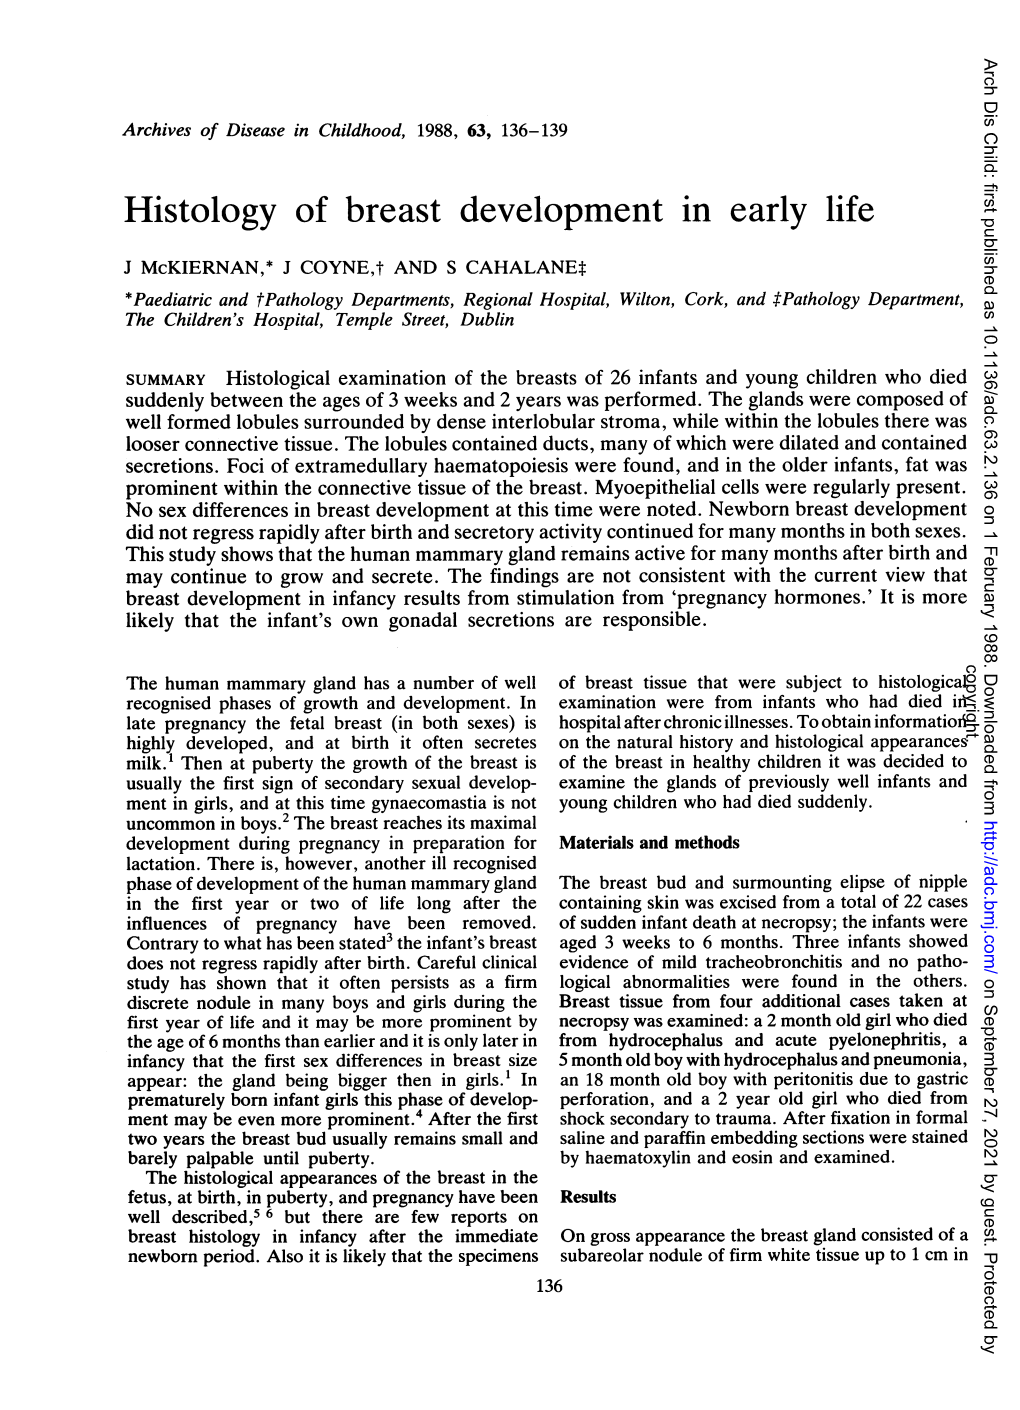 Histology of Breast Development in Early Life